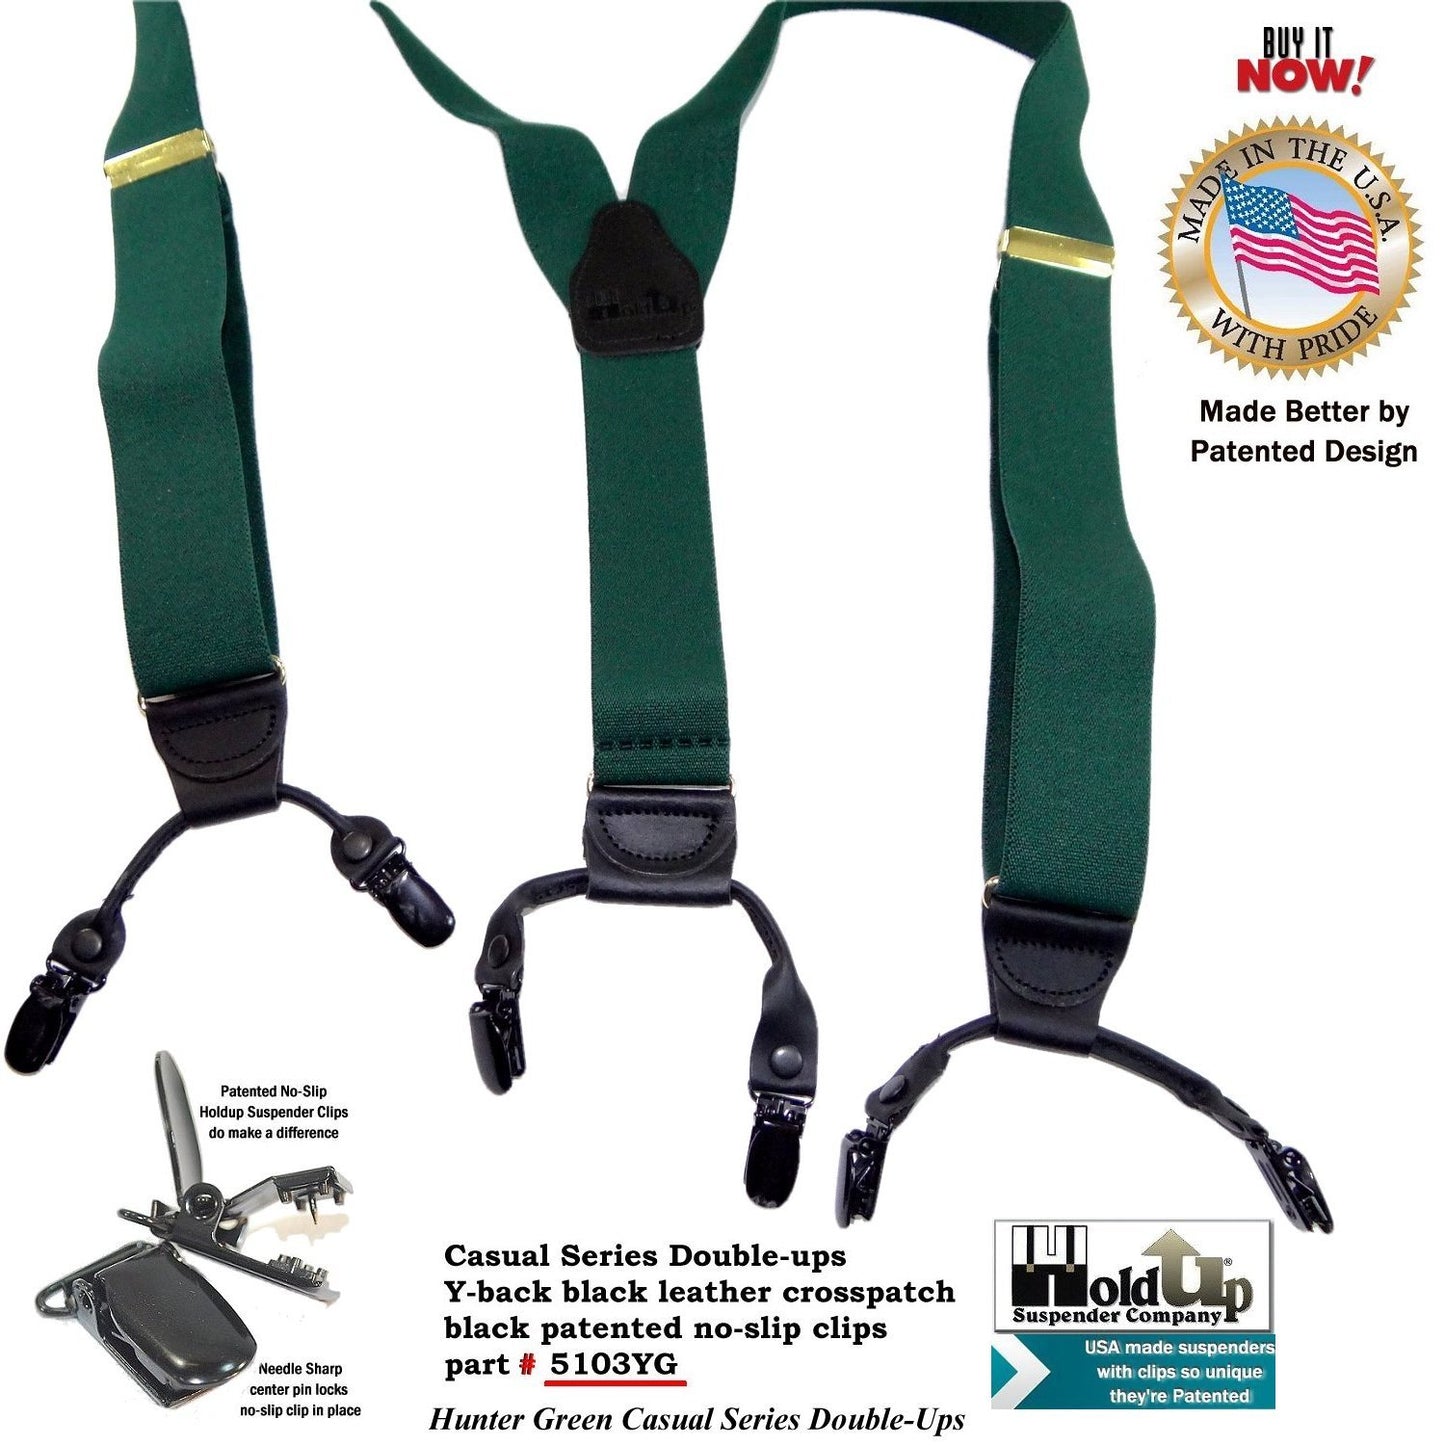 Holdup Brand Dark Hunter Green Dual Clip Double-Up Style Suspenders with Y-Back crosspatch and Patented no-slip clips